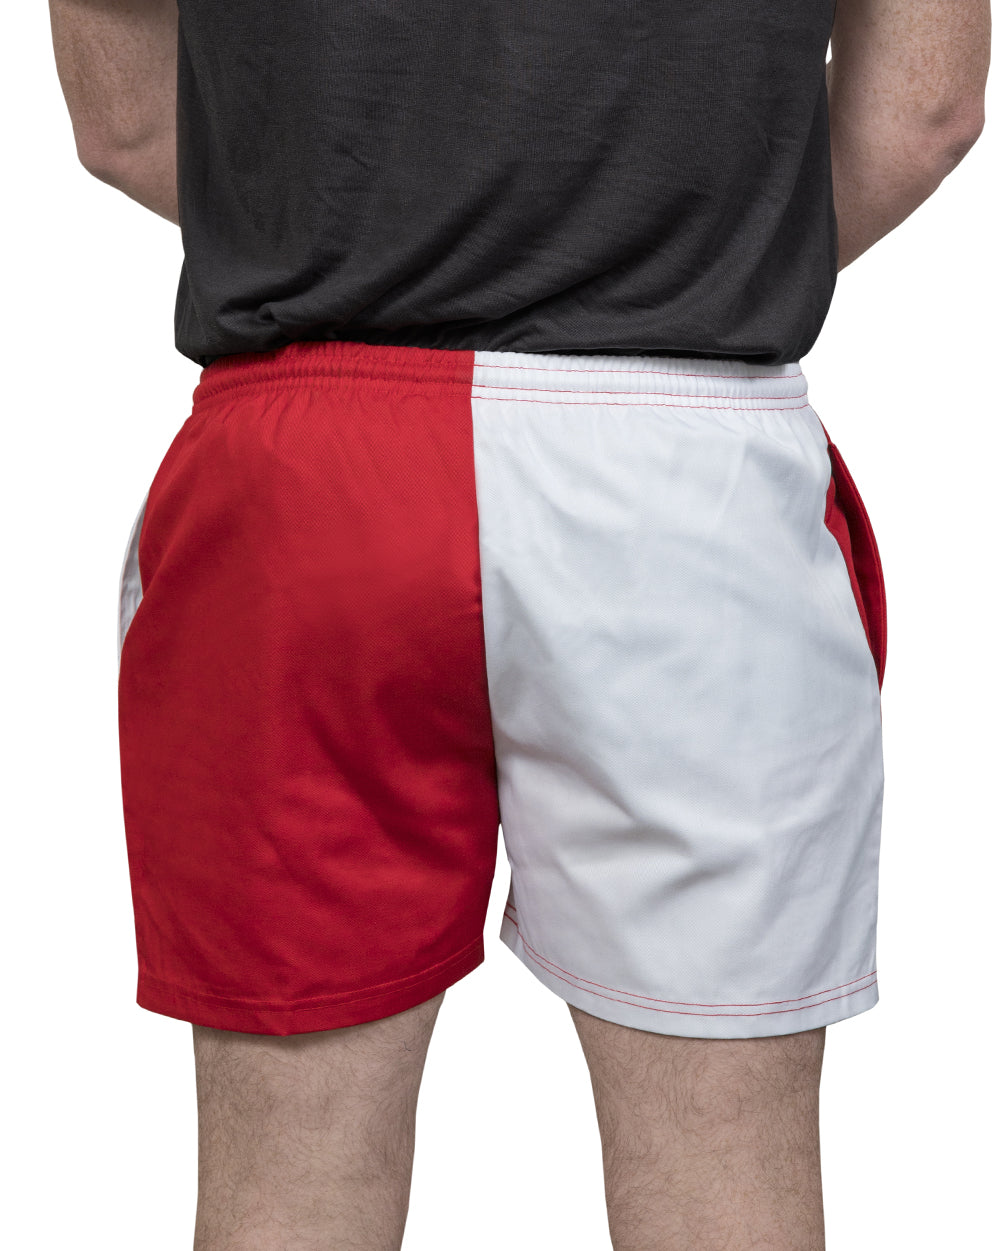 Lion Red Retro Harlequin Rugby Shorts -  Beer Gear Apparel & Merchandise - Speights - Lion Red - VB - Tokyo Dy merch